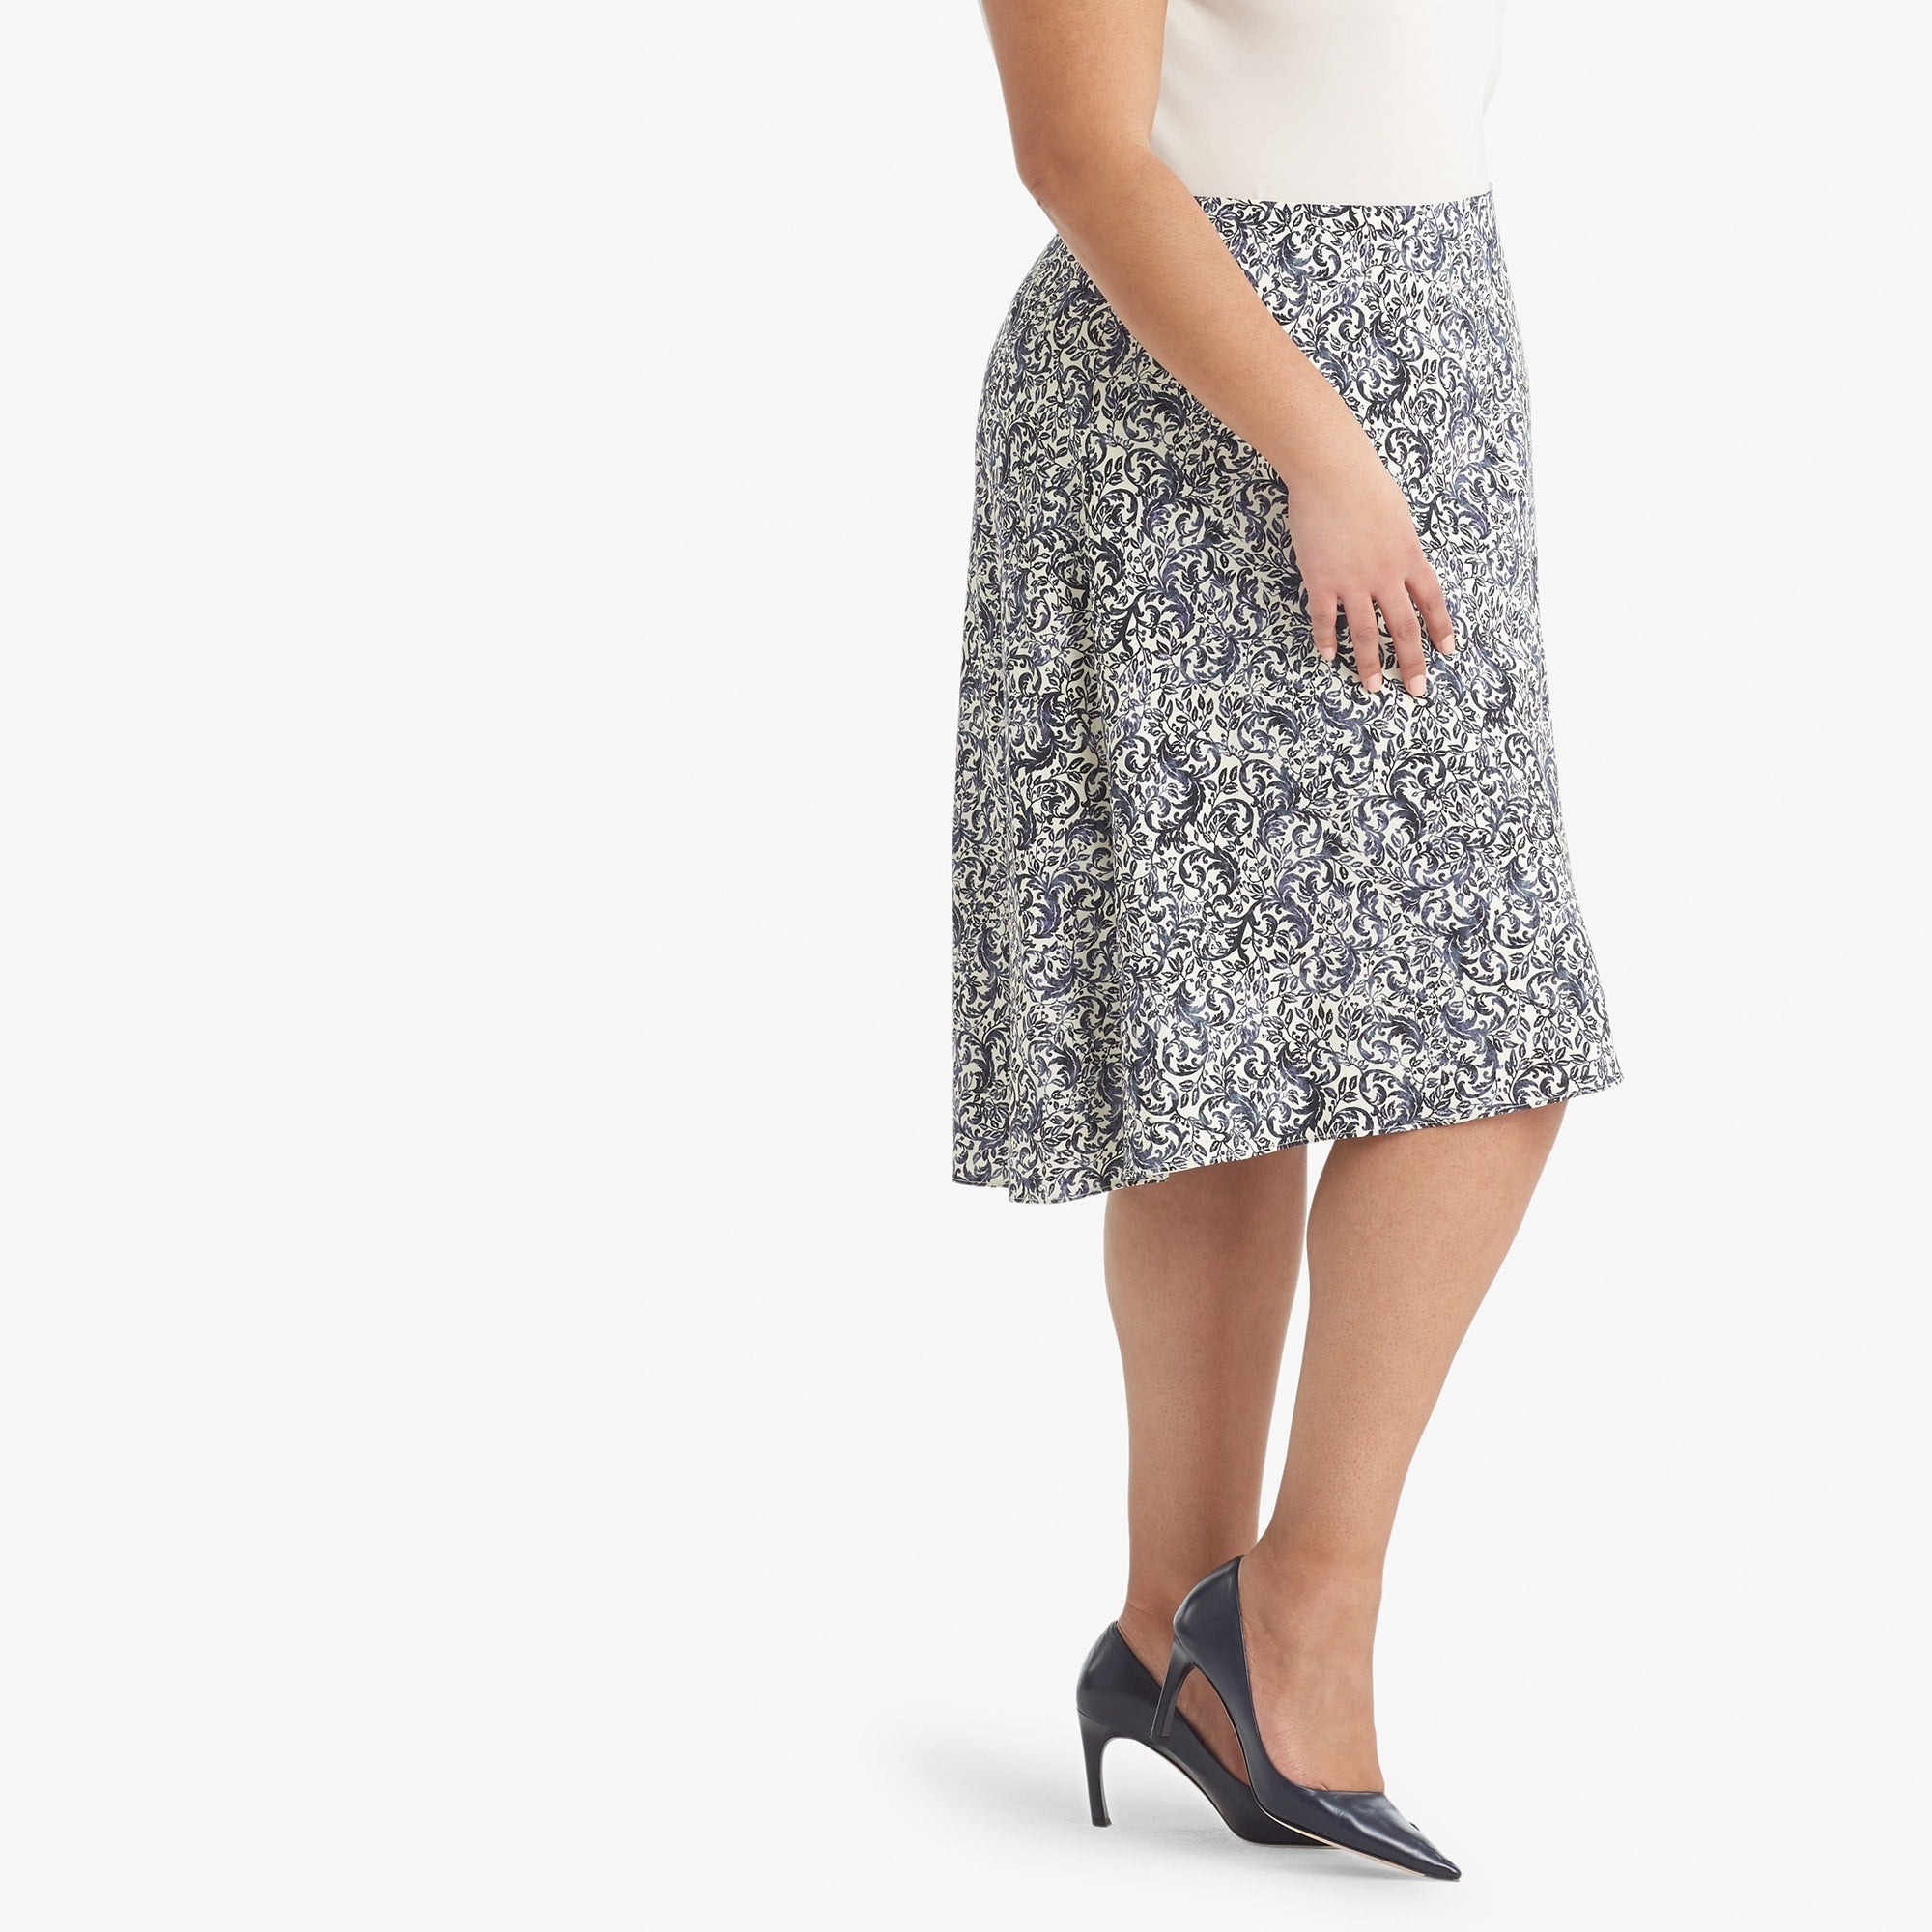 Side image of a woman standing wearing the Hopson skirt Ivy Print in galaxy blue